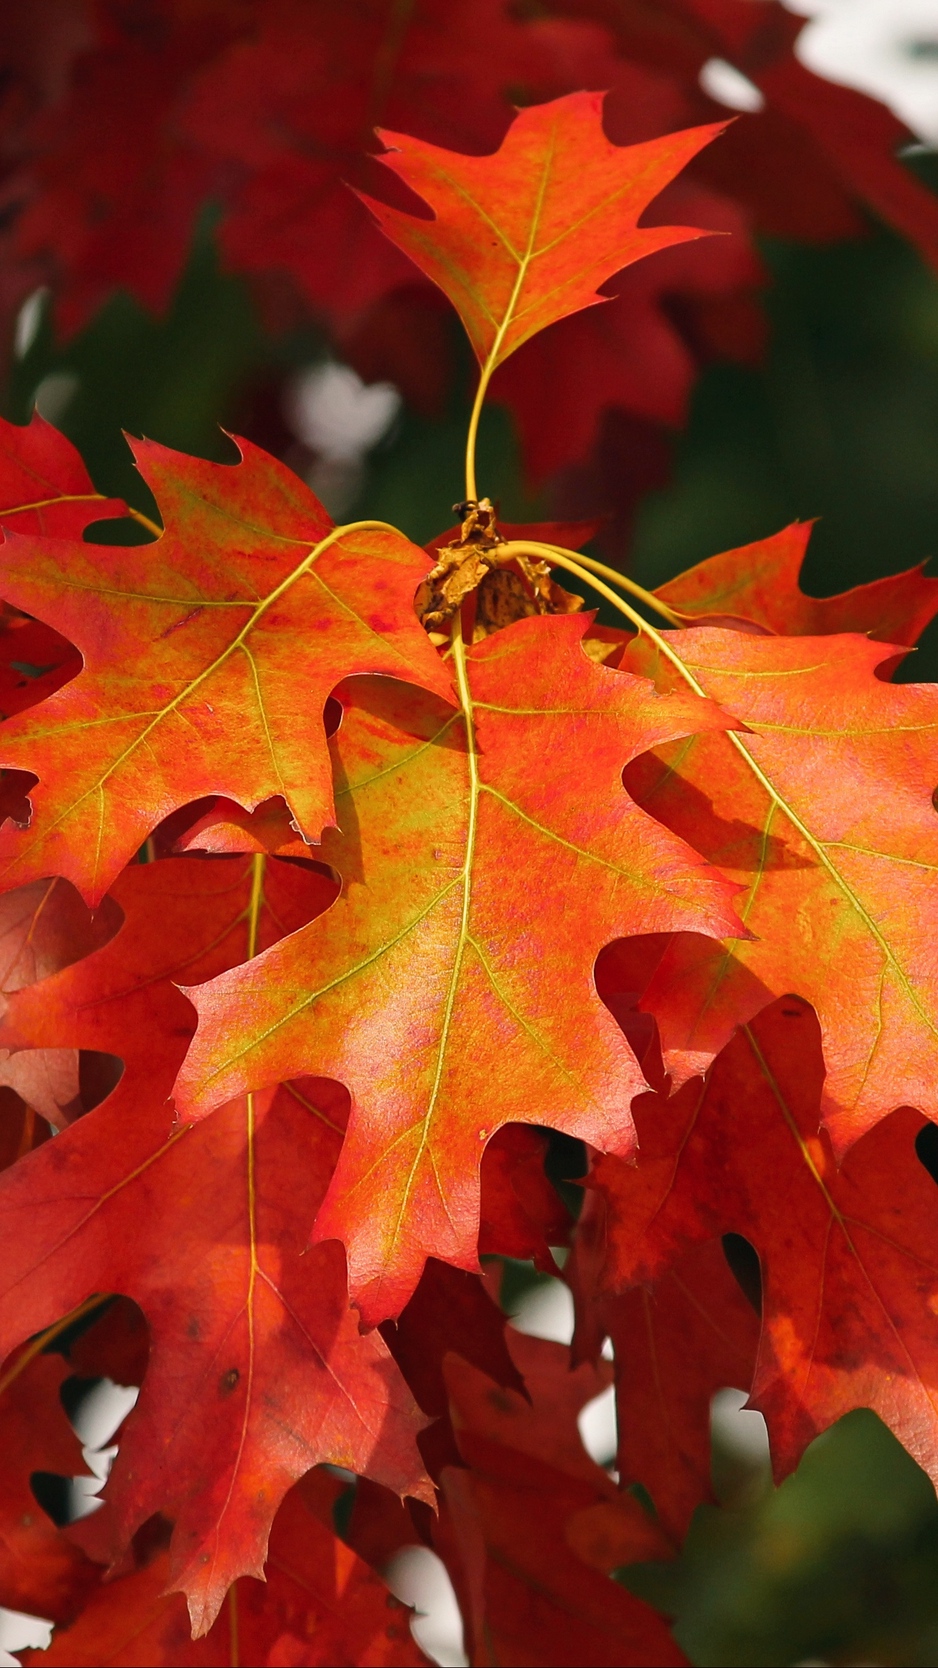 Wallpaper Leaves, Autumn, Red, October - Fall Leaves - HD Wallpaper 